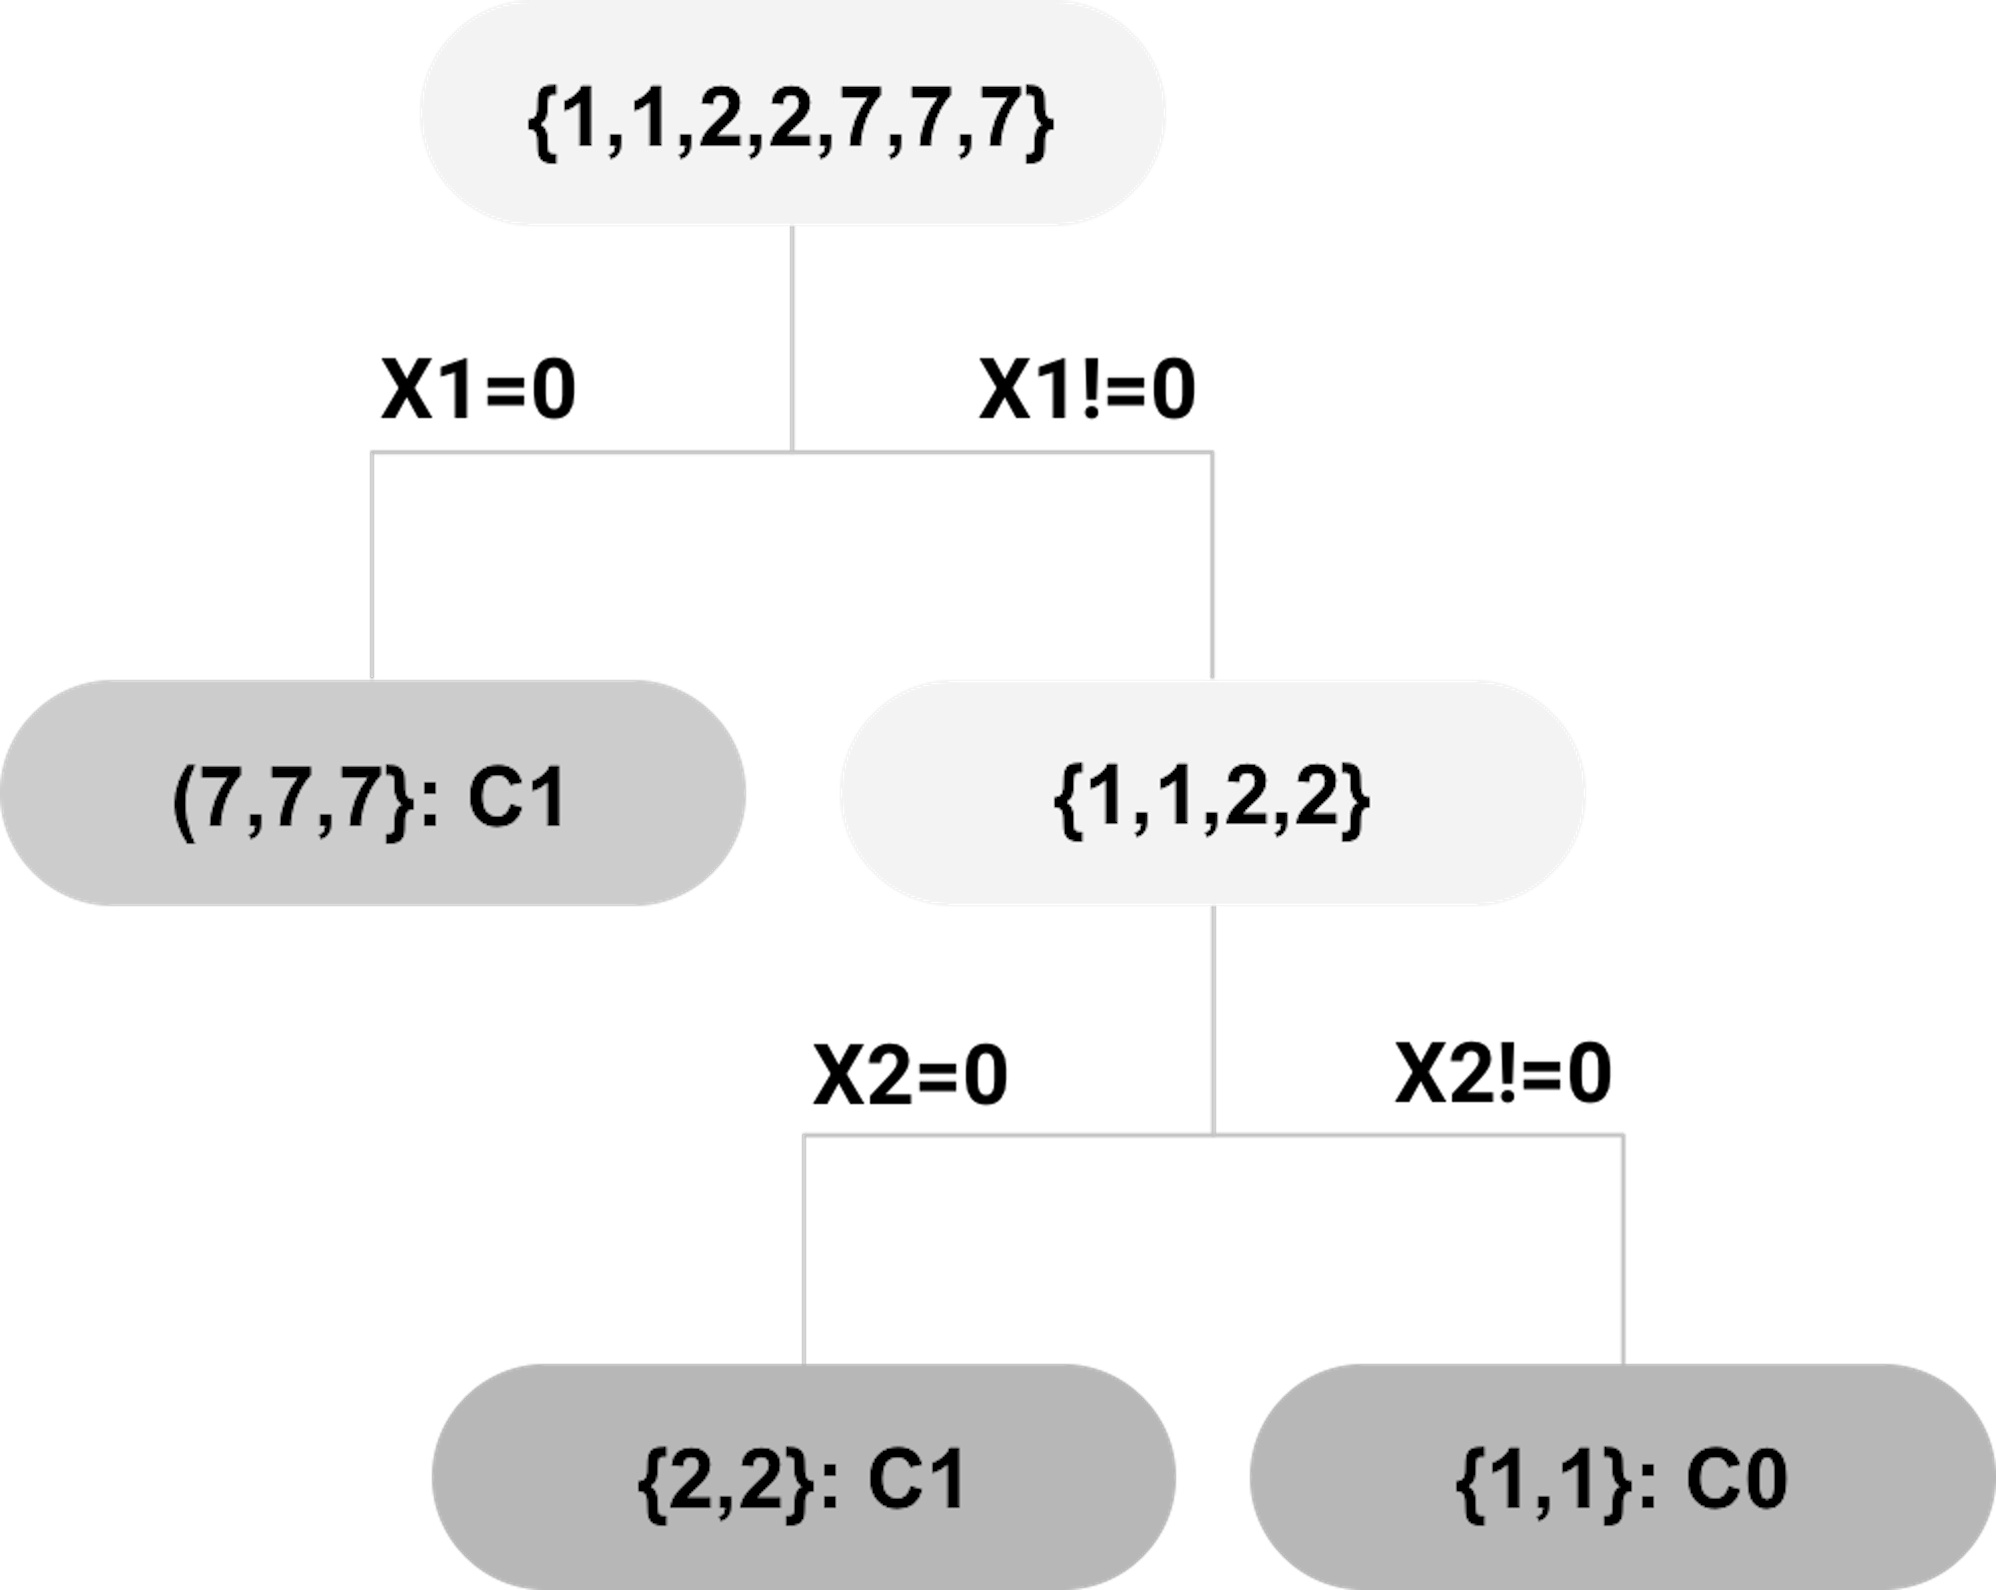 Example of a decision tree; leaf nodes (a.k.a., decision nodes) are shadowed in gray.